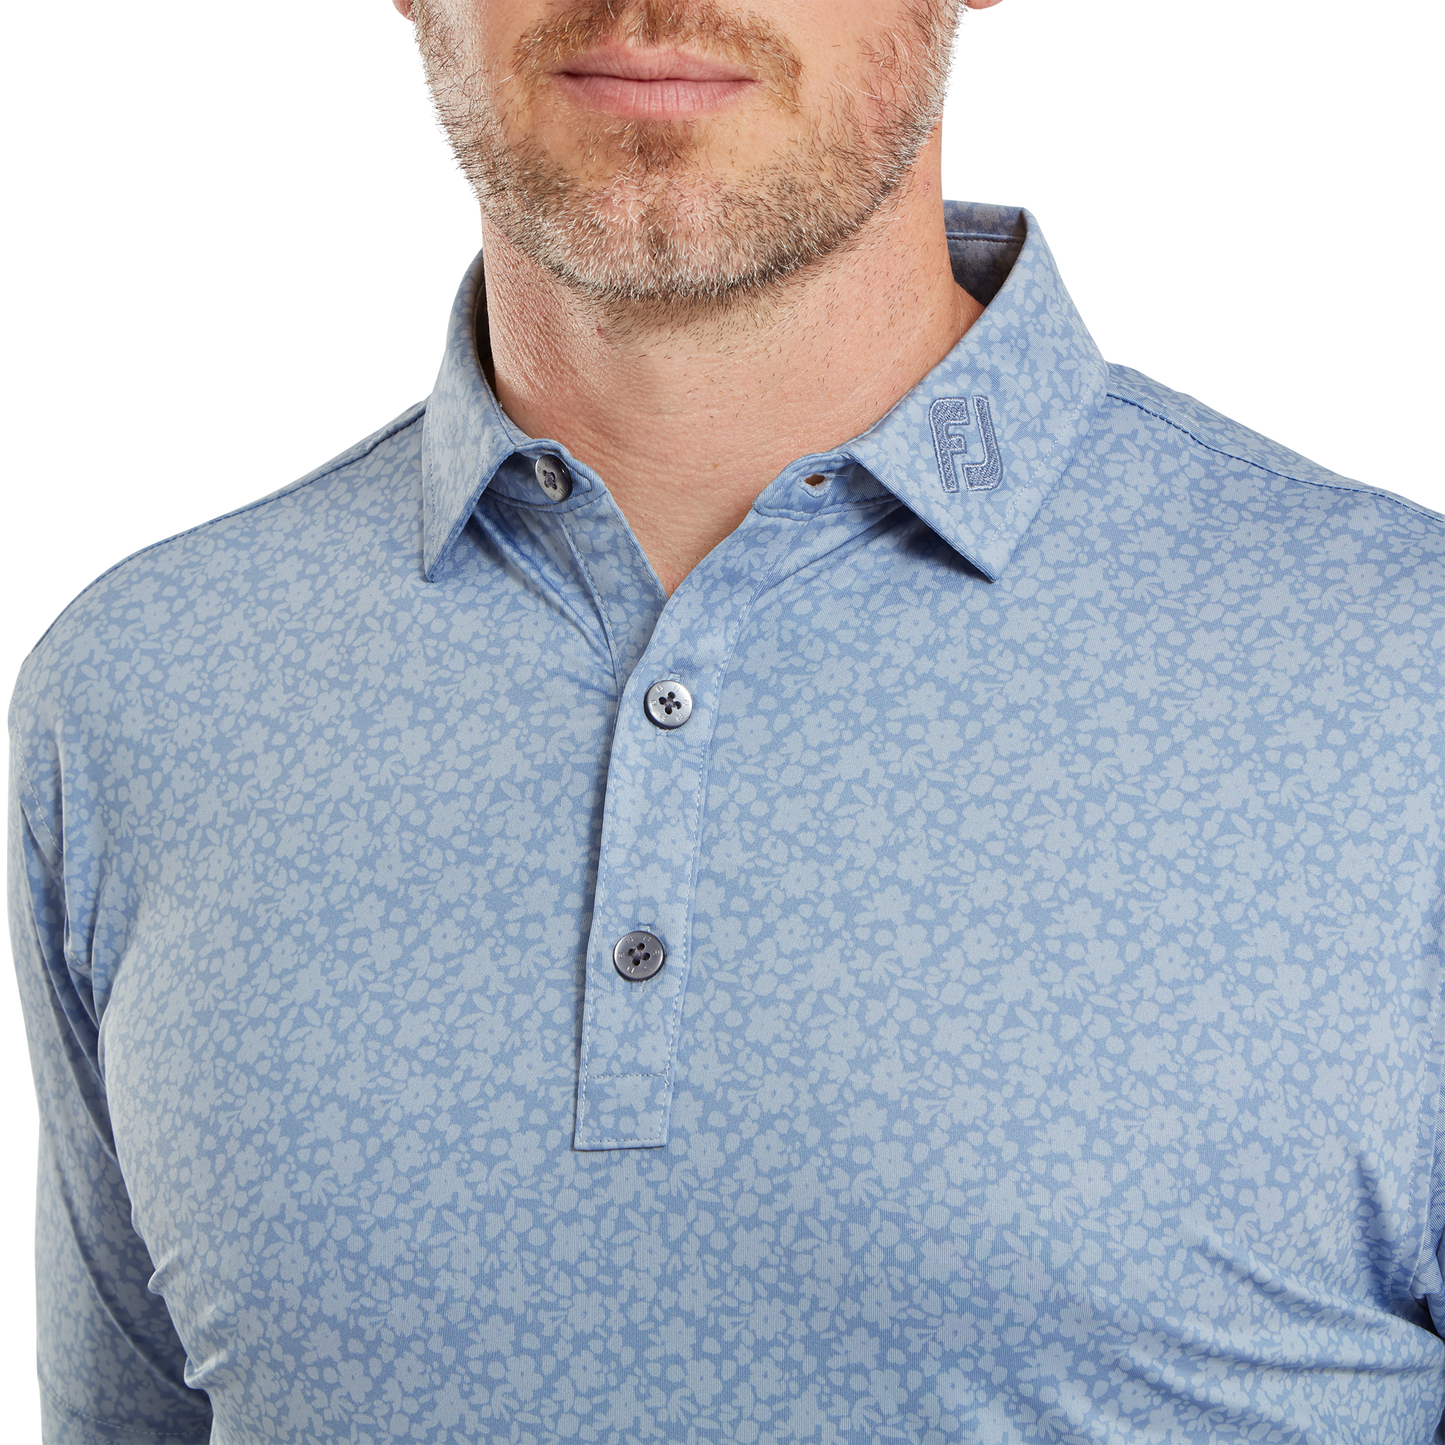 FootJoy Golf Painted Floral Polo Shirt 81618   